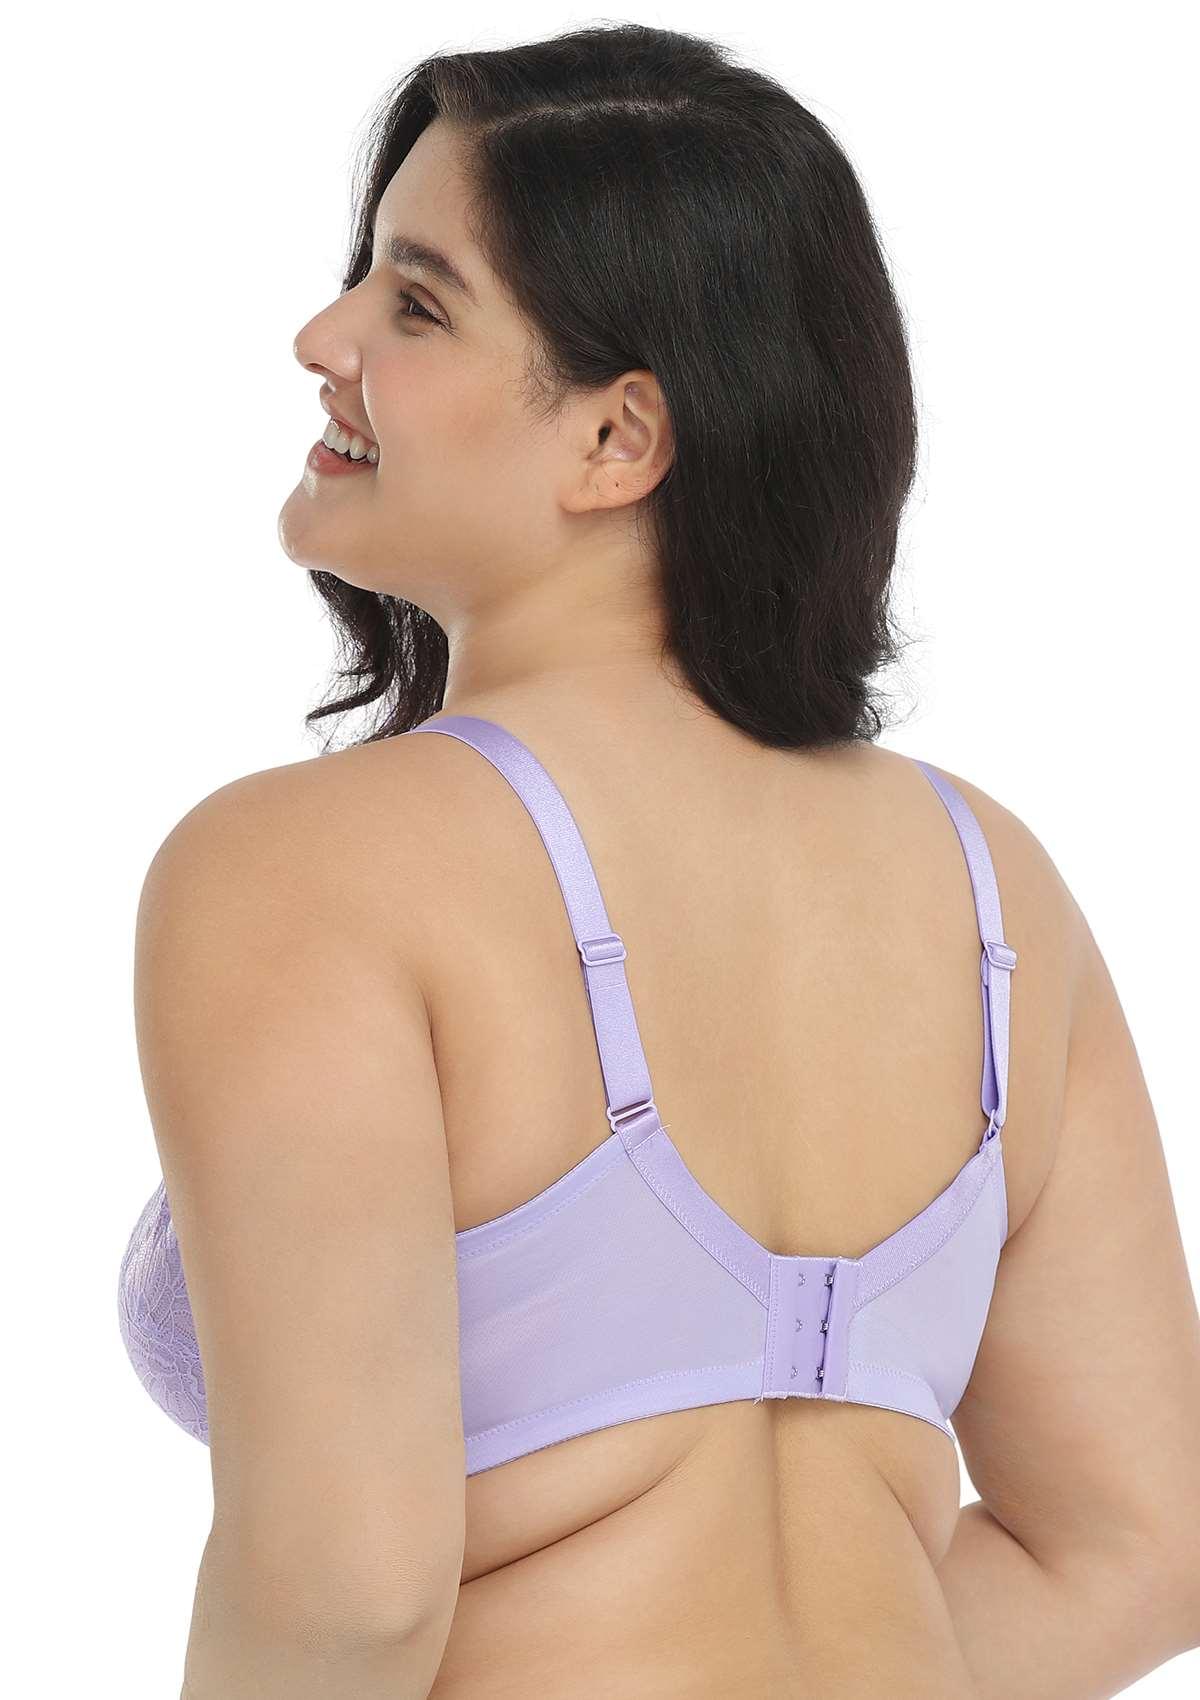 HSIA Blossom Transparent Lace Bra: Plus Size Wired Back Smoothing Bra - Light Purple / 40 / I